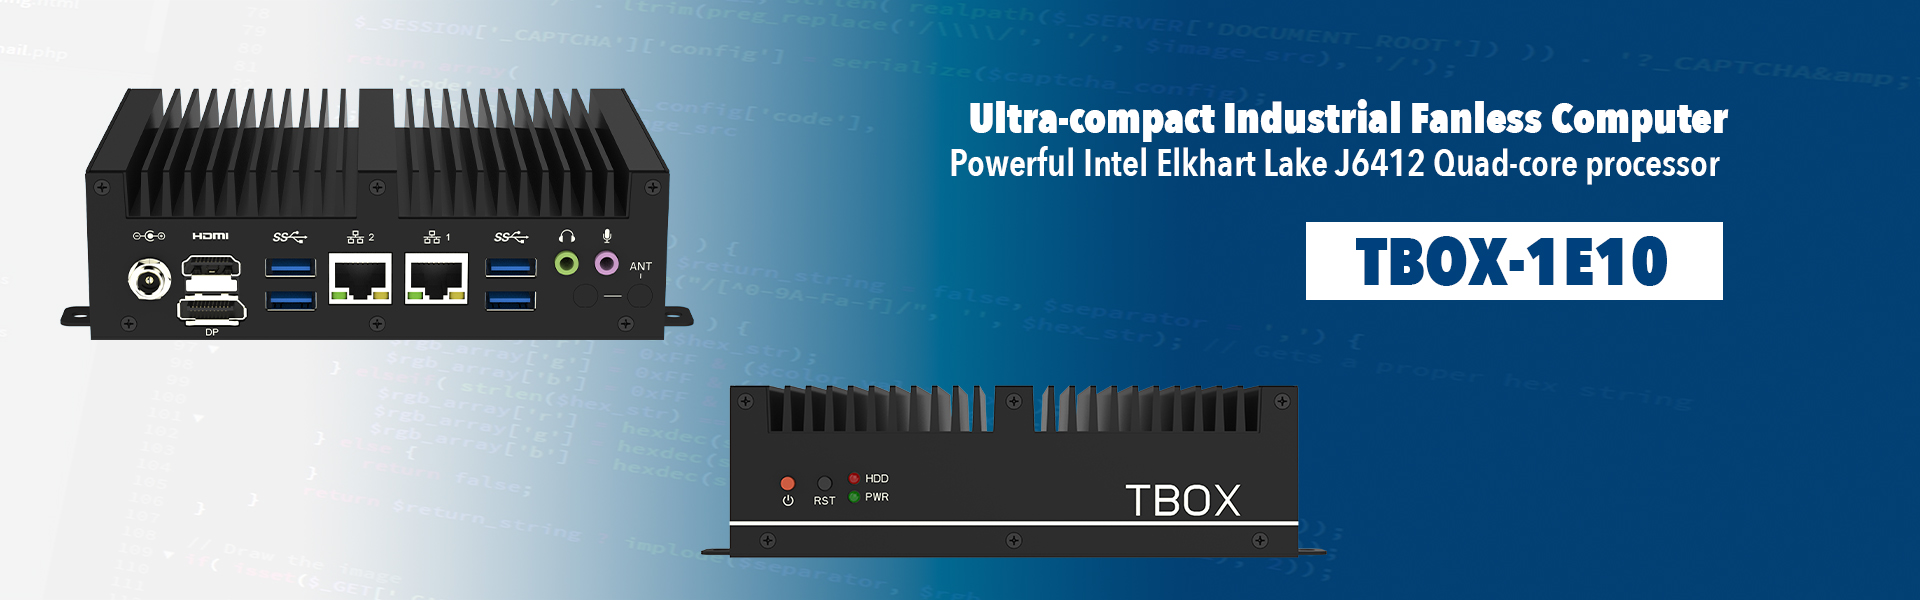 Ultra compact industrial fanless computer TBOX-1E10